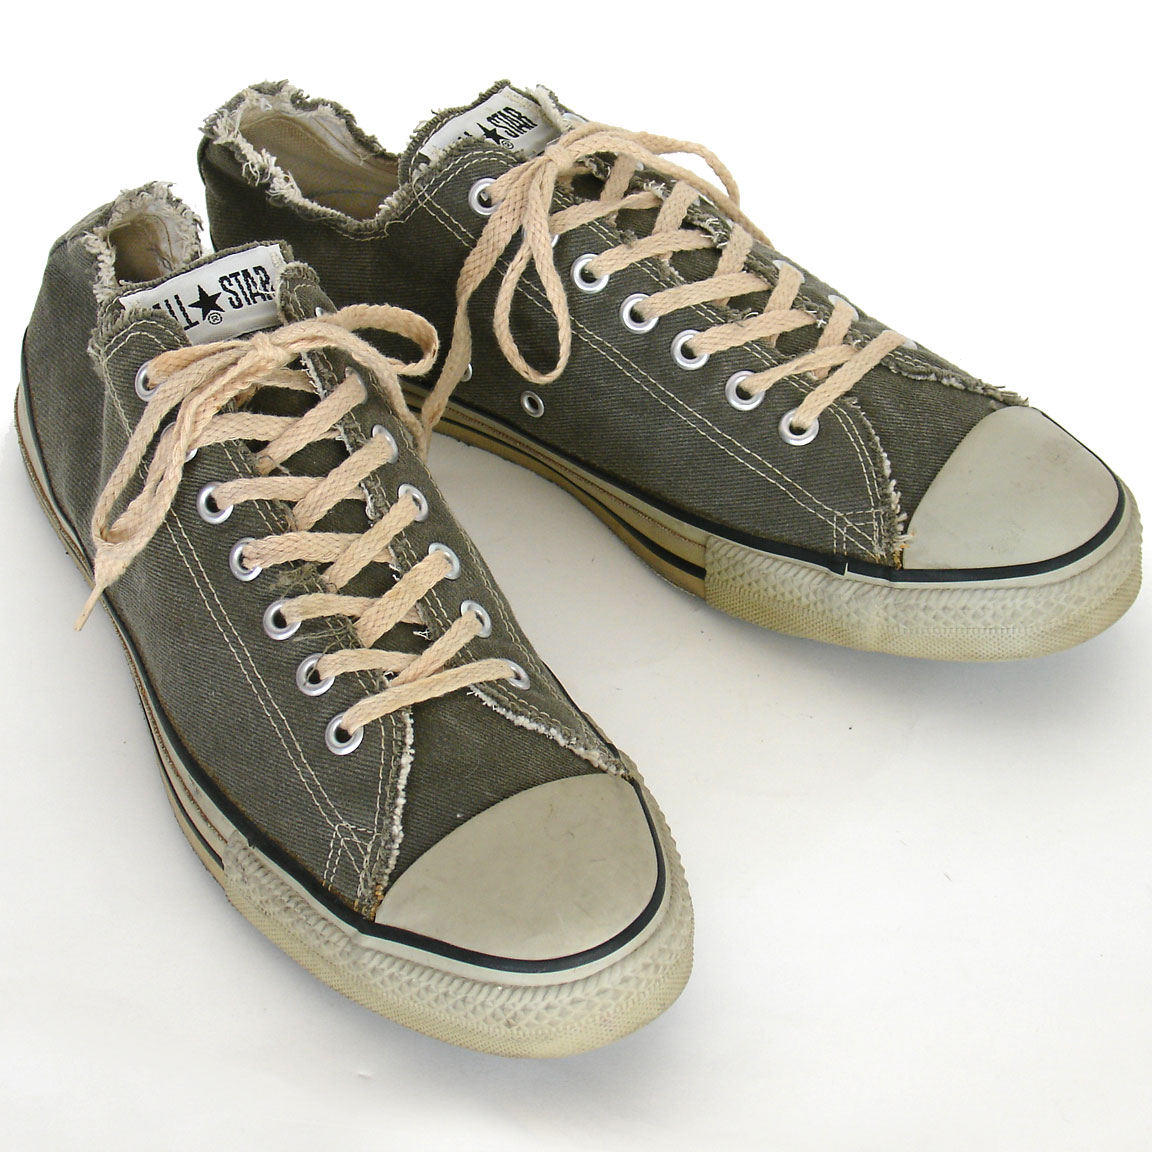 Vintage American-made Converse All Star Chuck Taylor frayed gray shoes for sale at http://www.collectornet.net/shoes